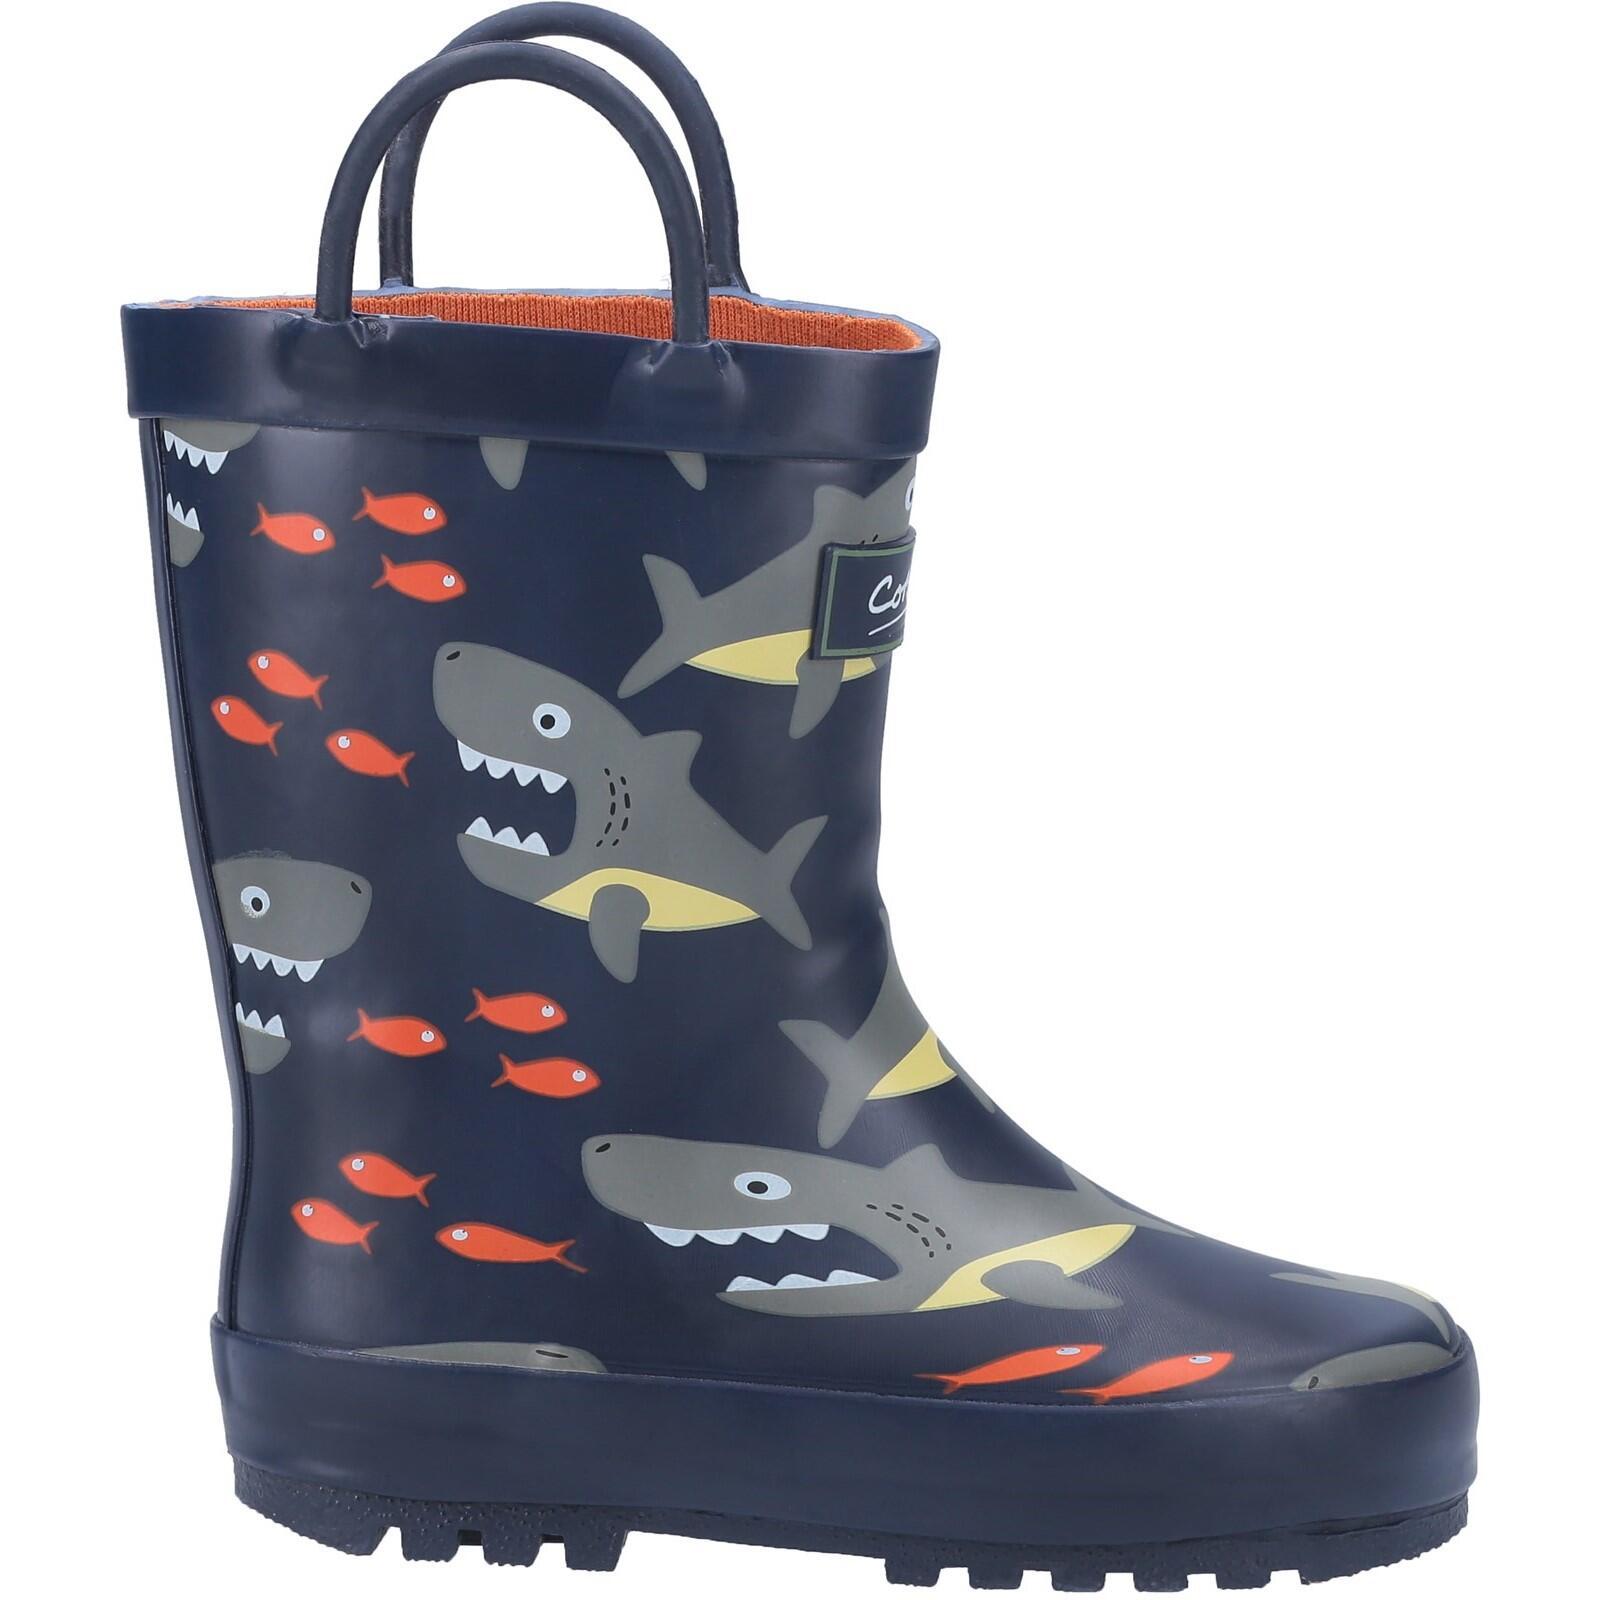 COTSWOLD Puddle Childrens Wellingtons GREY